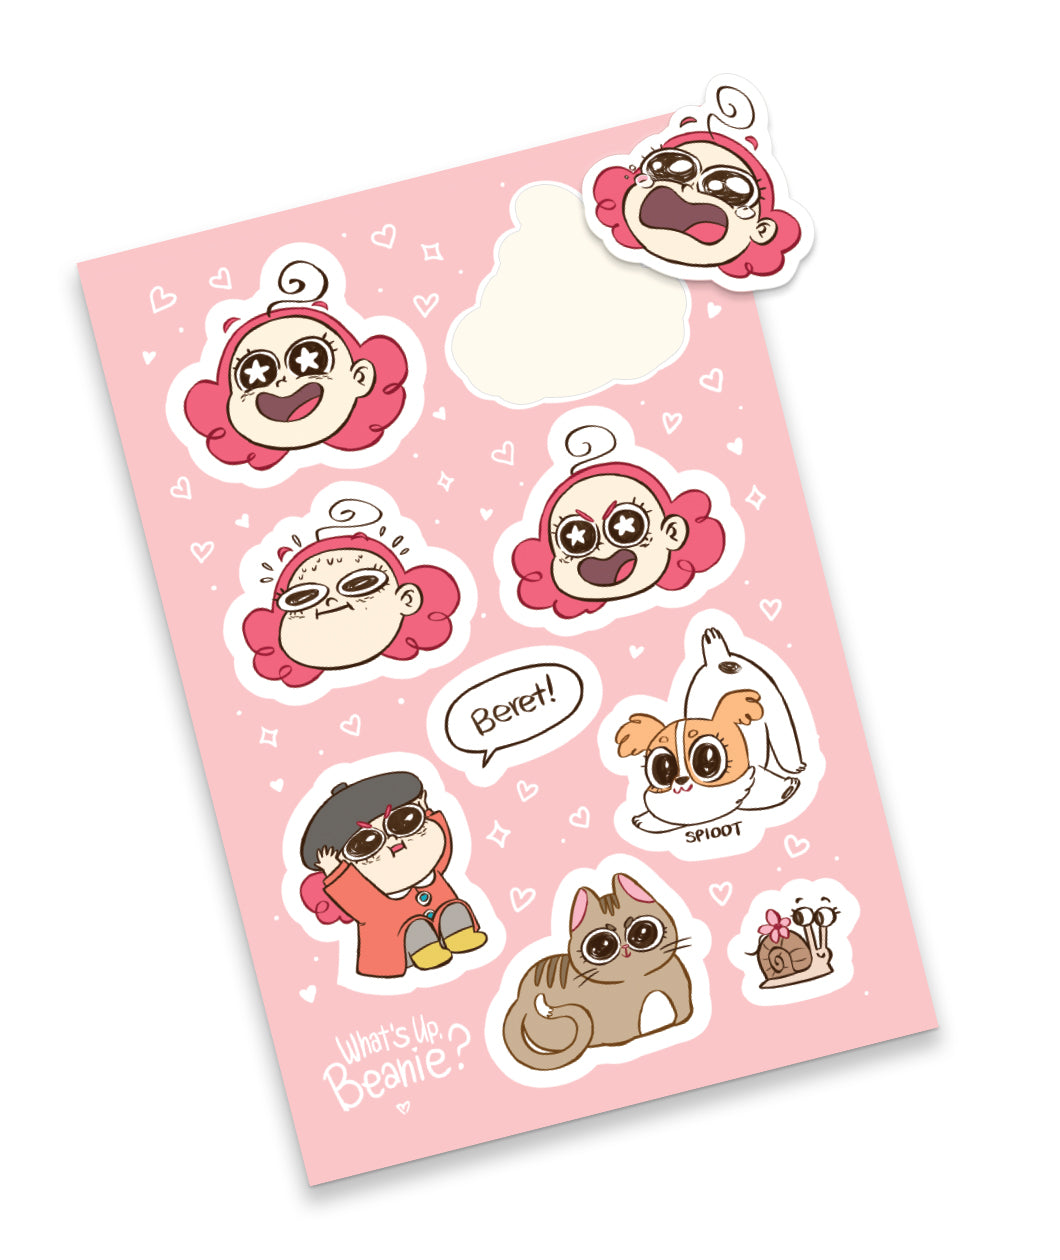 A rectangular pink sticker sheet that contains 9 stickers. 4 of the stickers are the head of a grl with pink hair in various expressions, and the other are a cat, a dog, a snail, the same girl crouched with a beanie, and a word balloon that says 